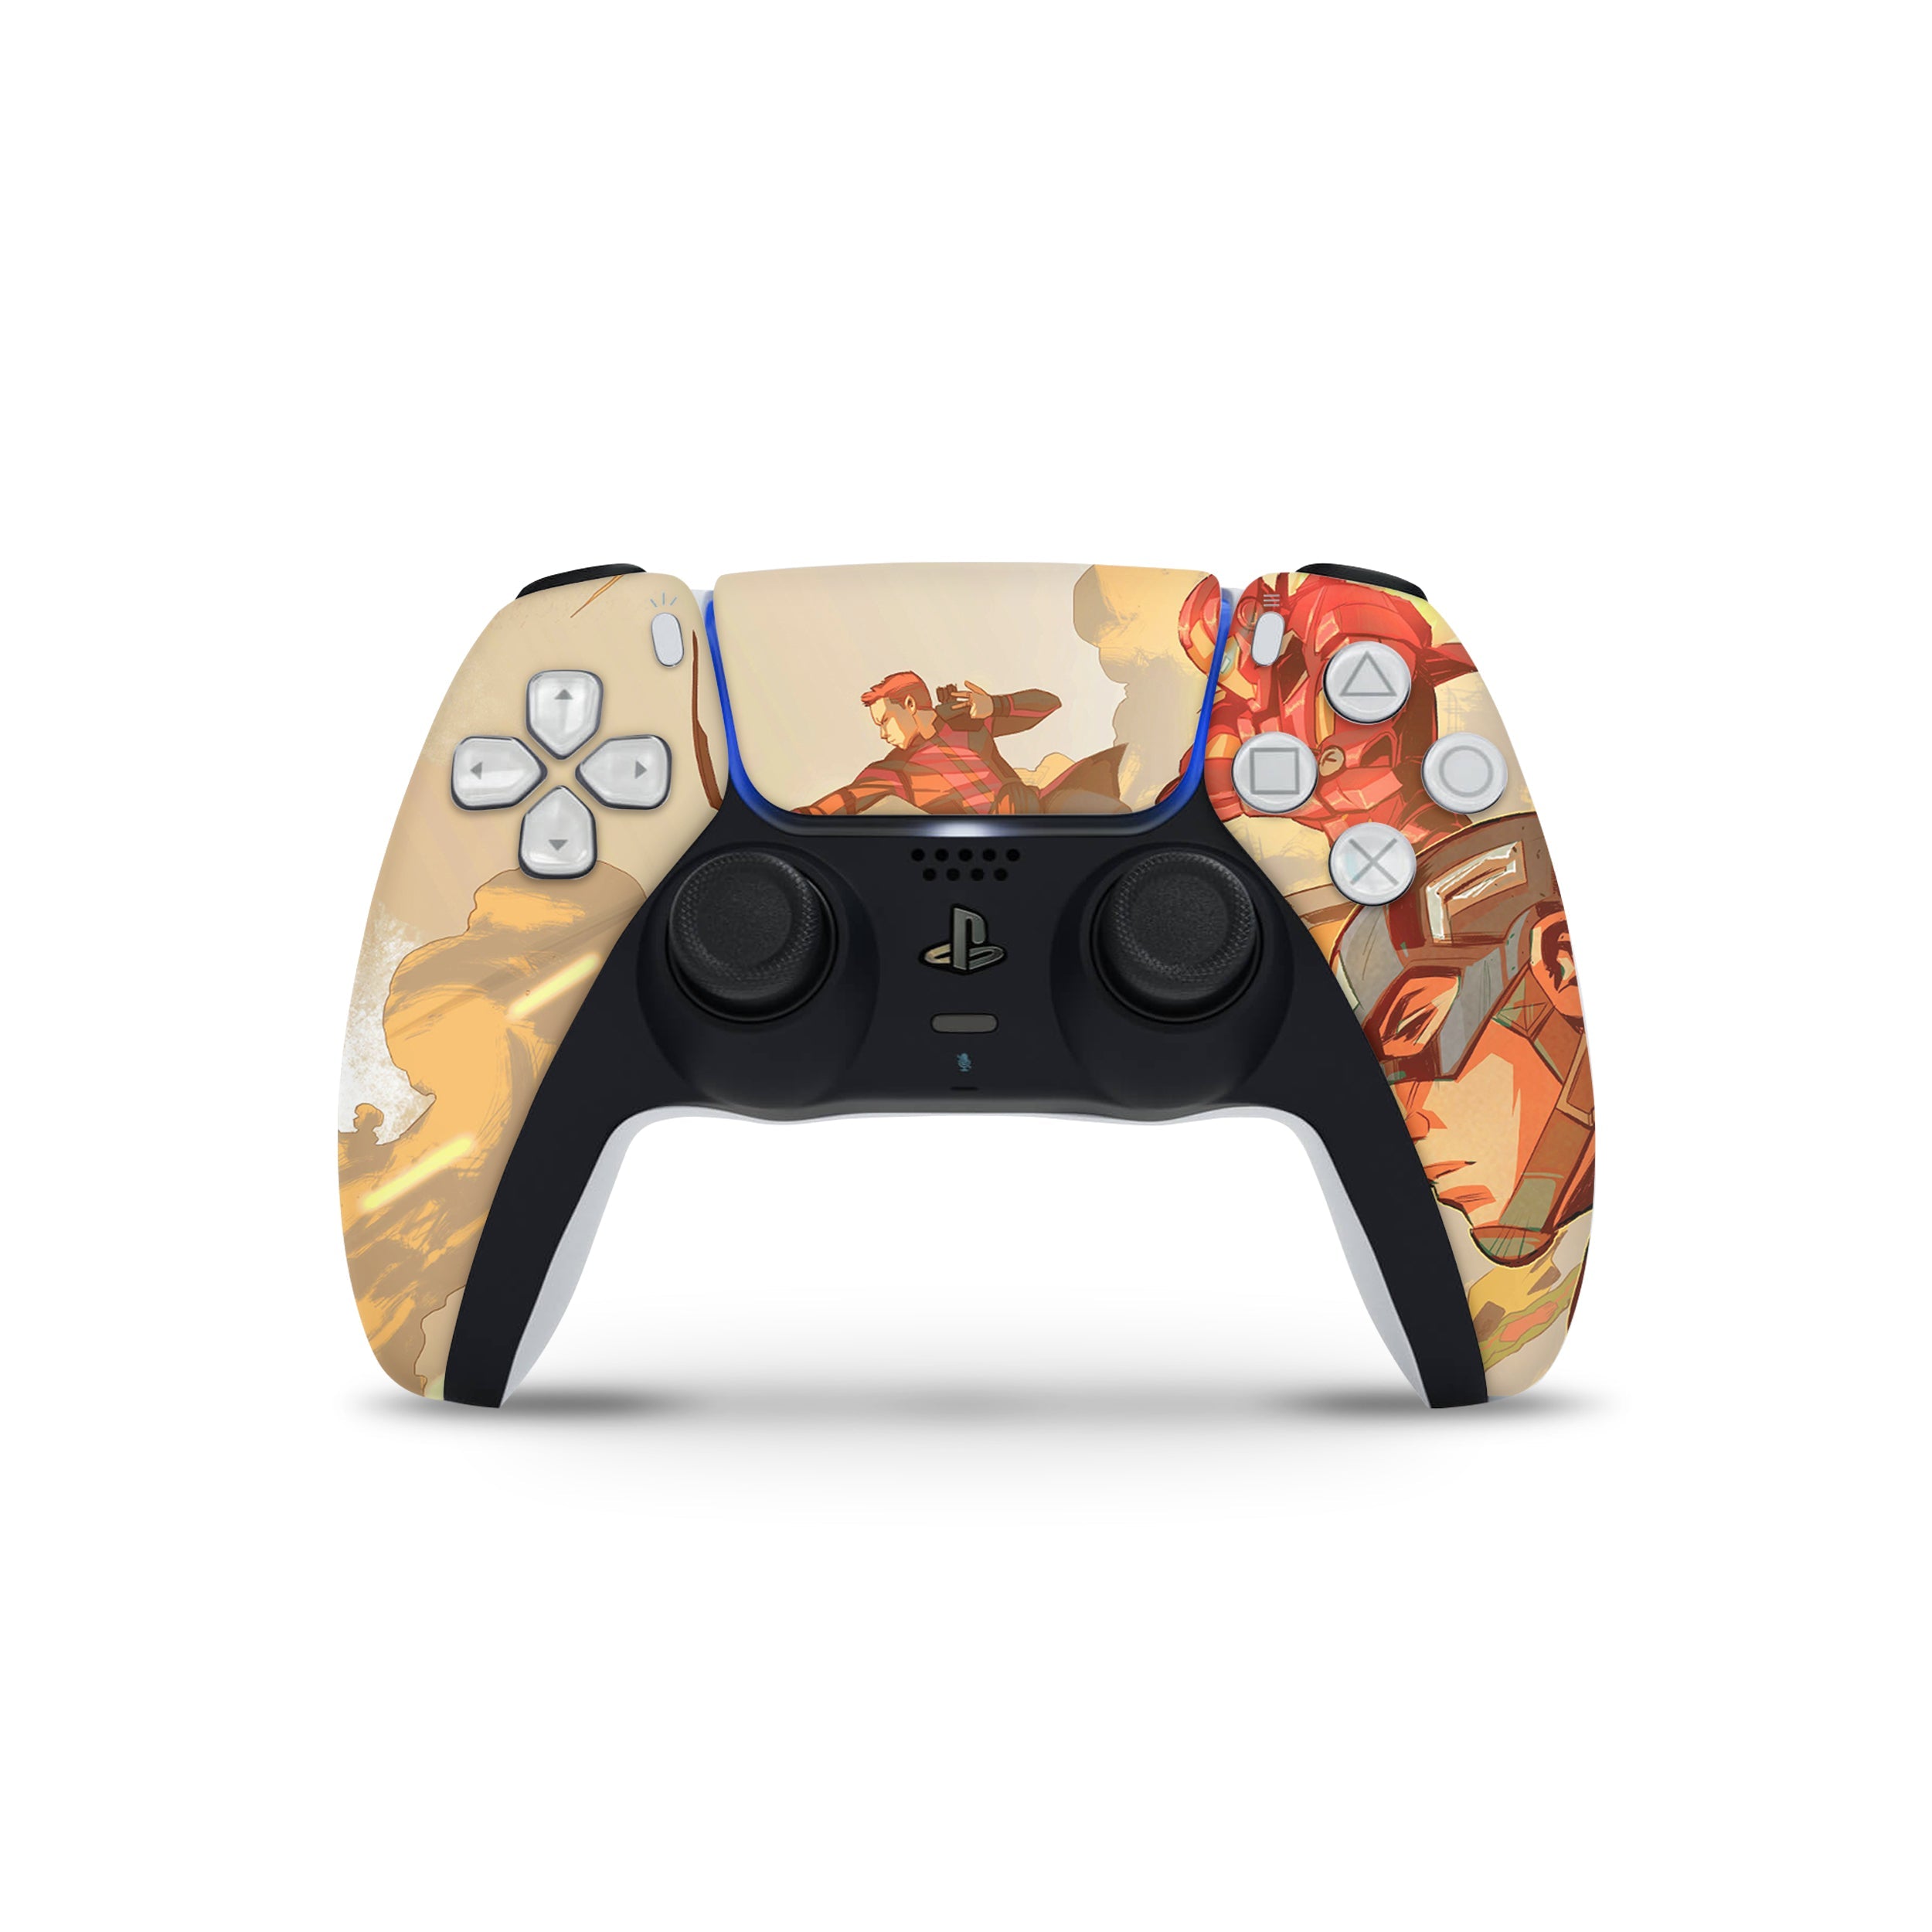 A video game skin featuring a Marvel Comics Avengers design for the PS5 DualSense Controller.